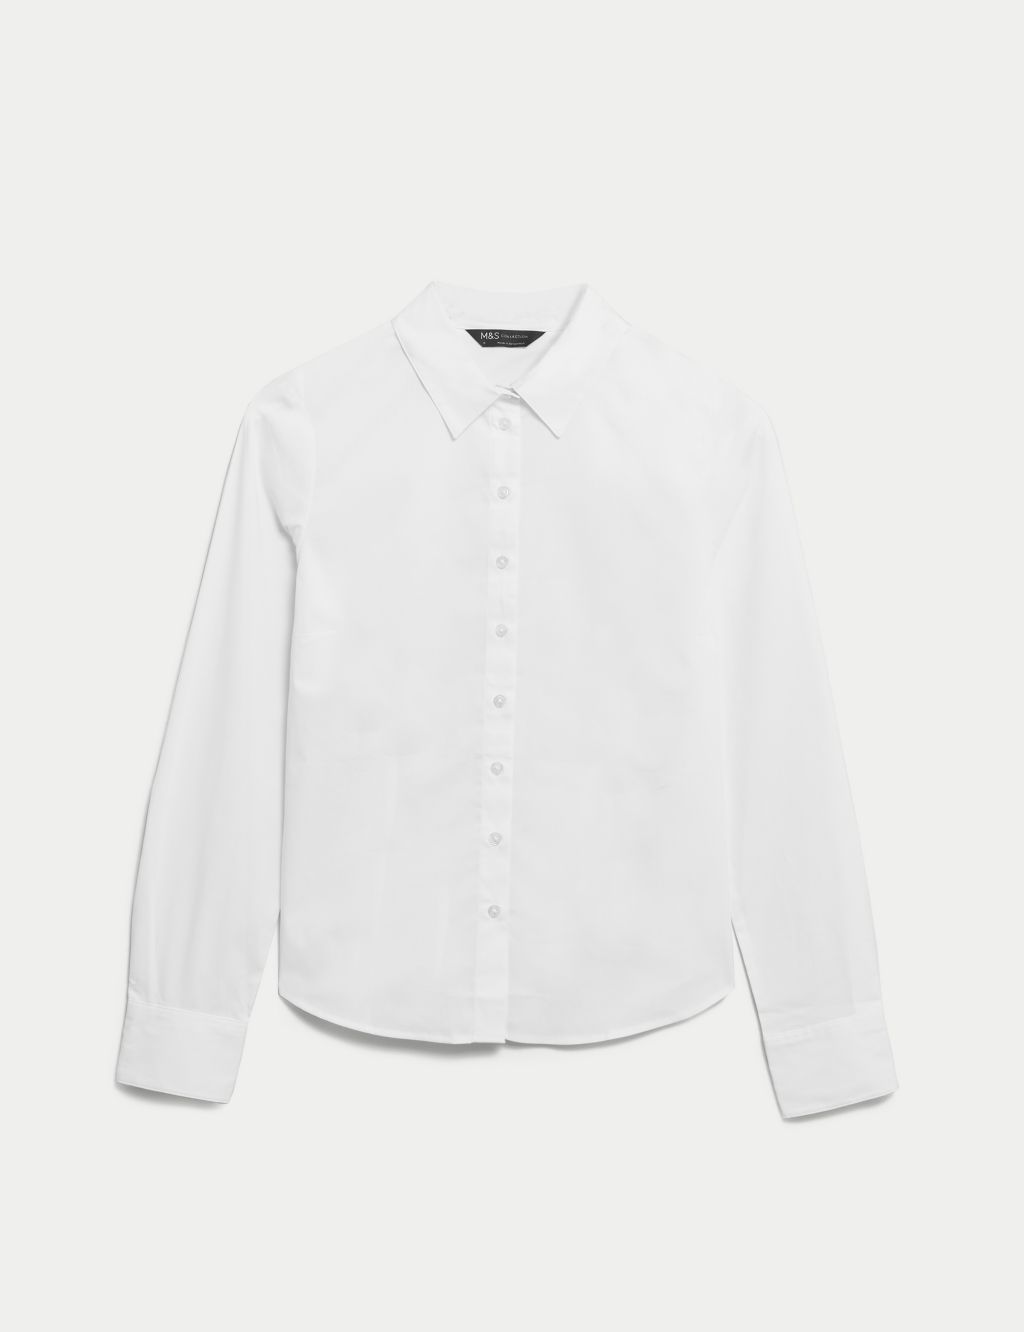 Cotton Rich Fitted Collared Shirt image 2